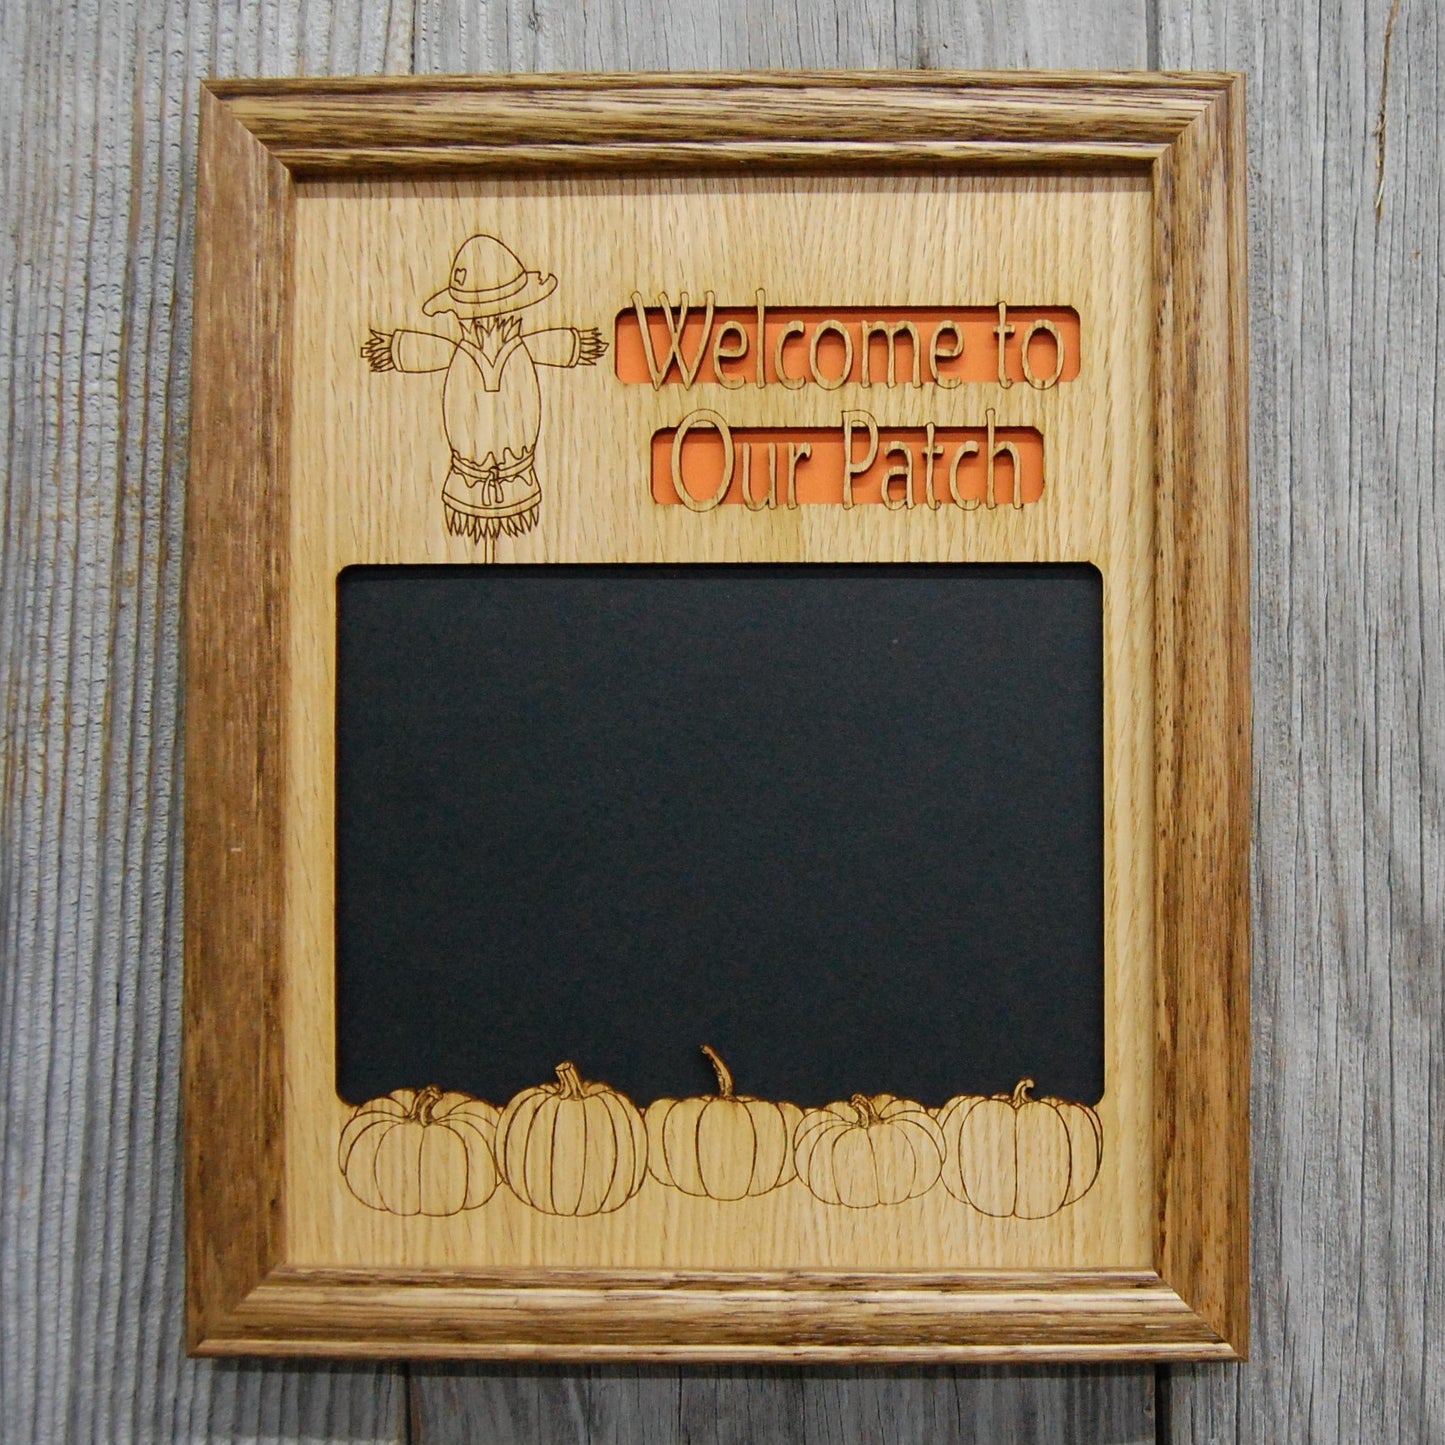 Welcome  To Our Patch Picture Frame - 8x10 Frame Holds 5x7 Photo